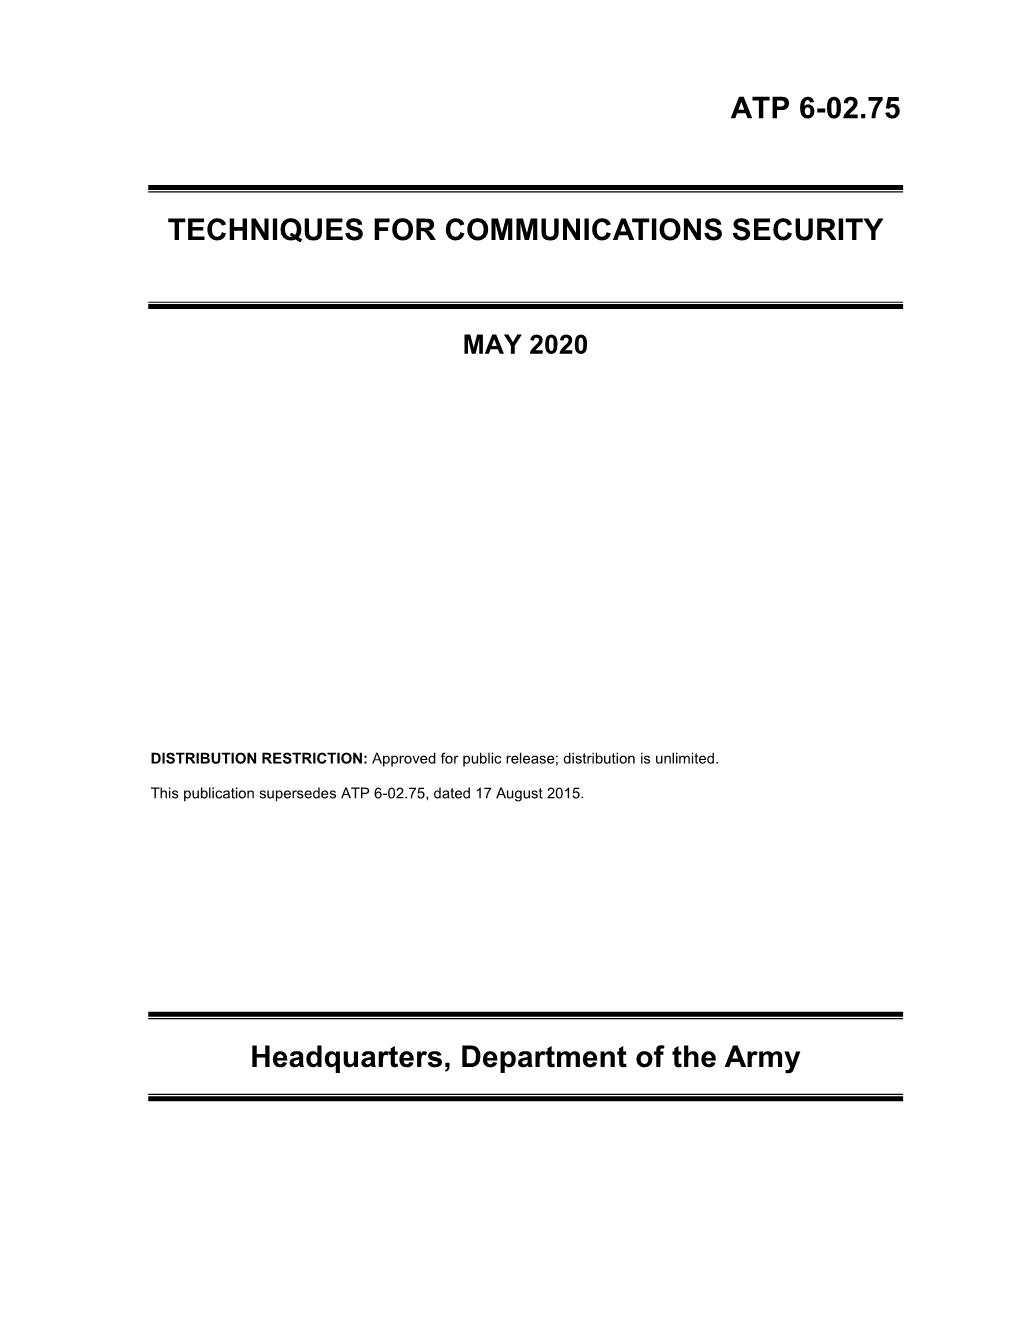 Atp 6-02.75 Techniques for Communications Security